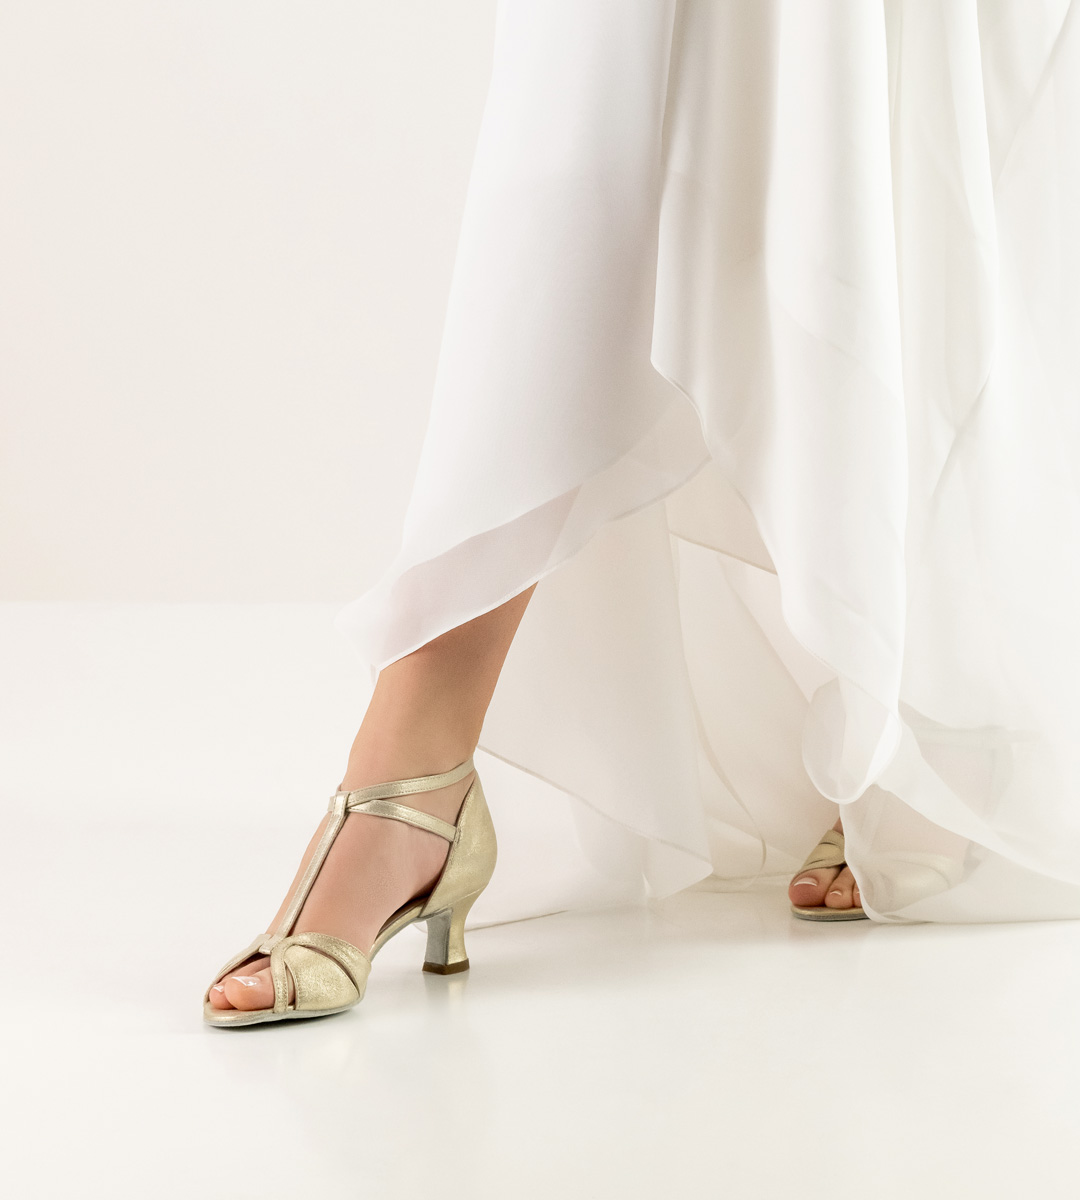 Werner Kern bridal shoe in combination with white dress